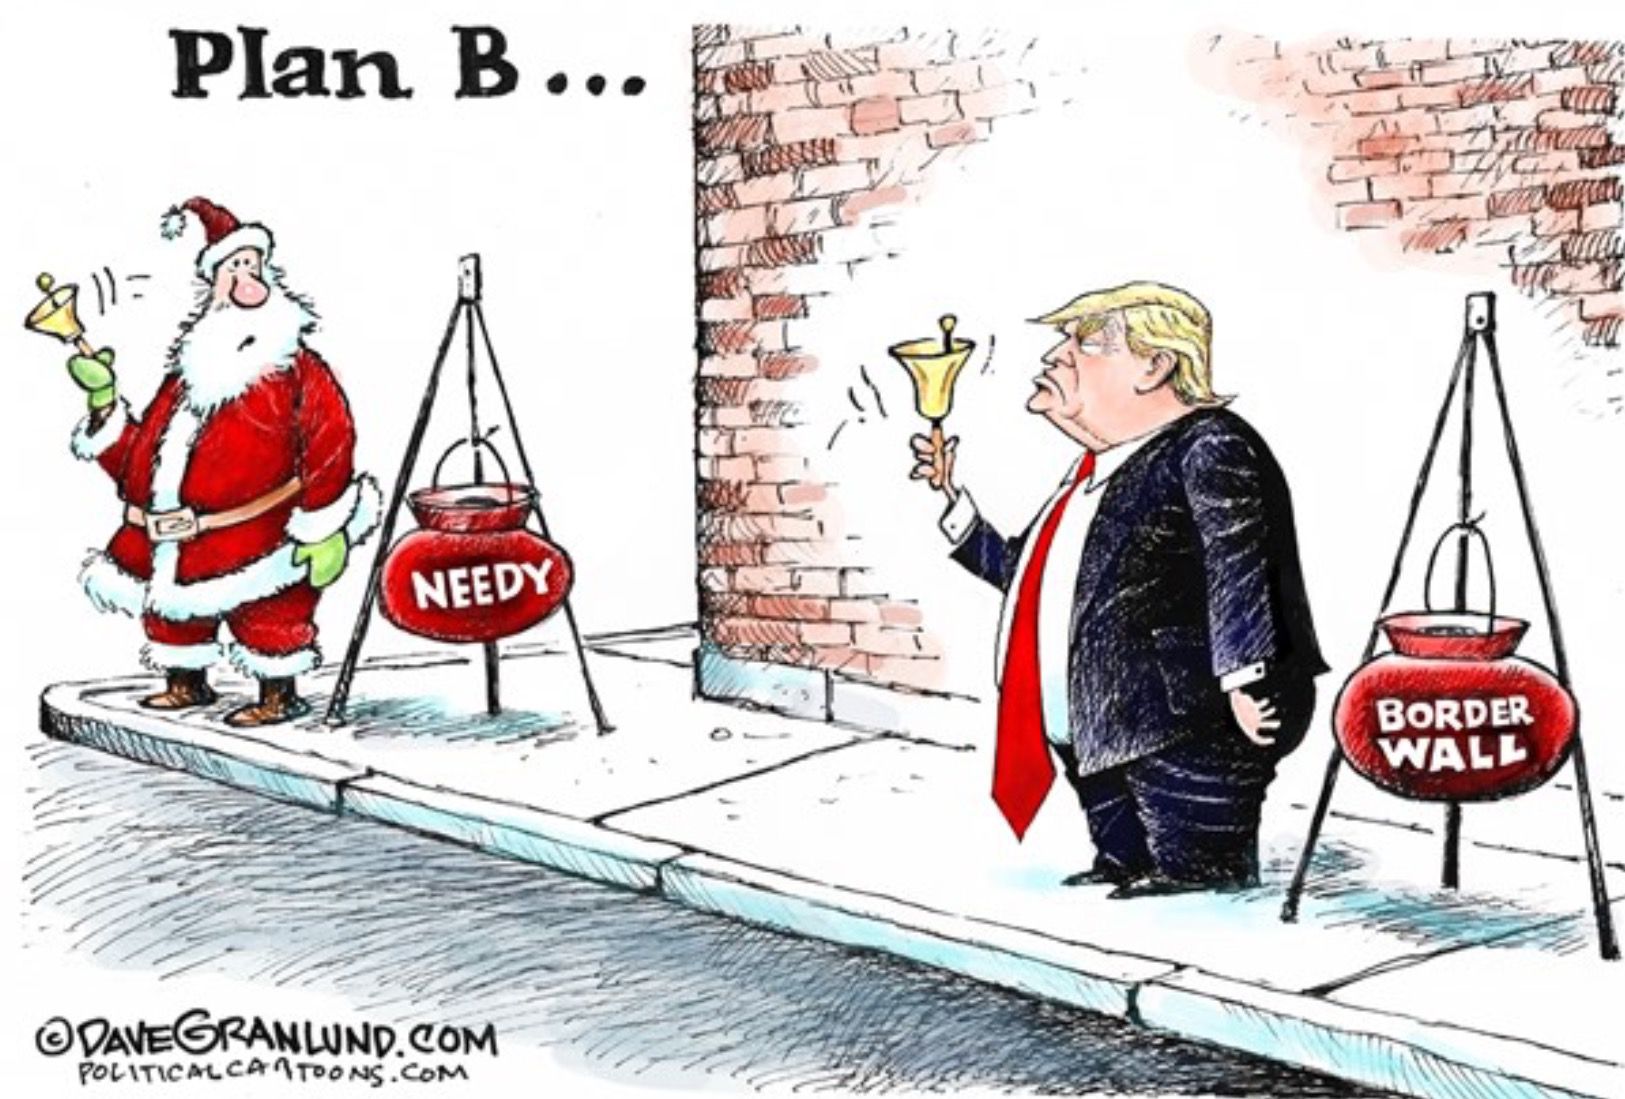 It's beginning to look a lot like a Trump Christmas. The season in cartoons.  - The Washington Post